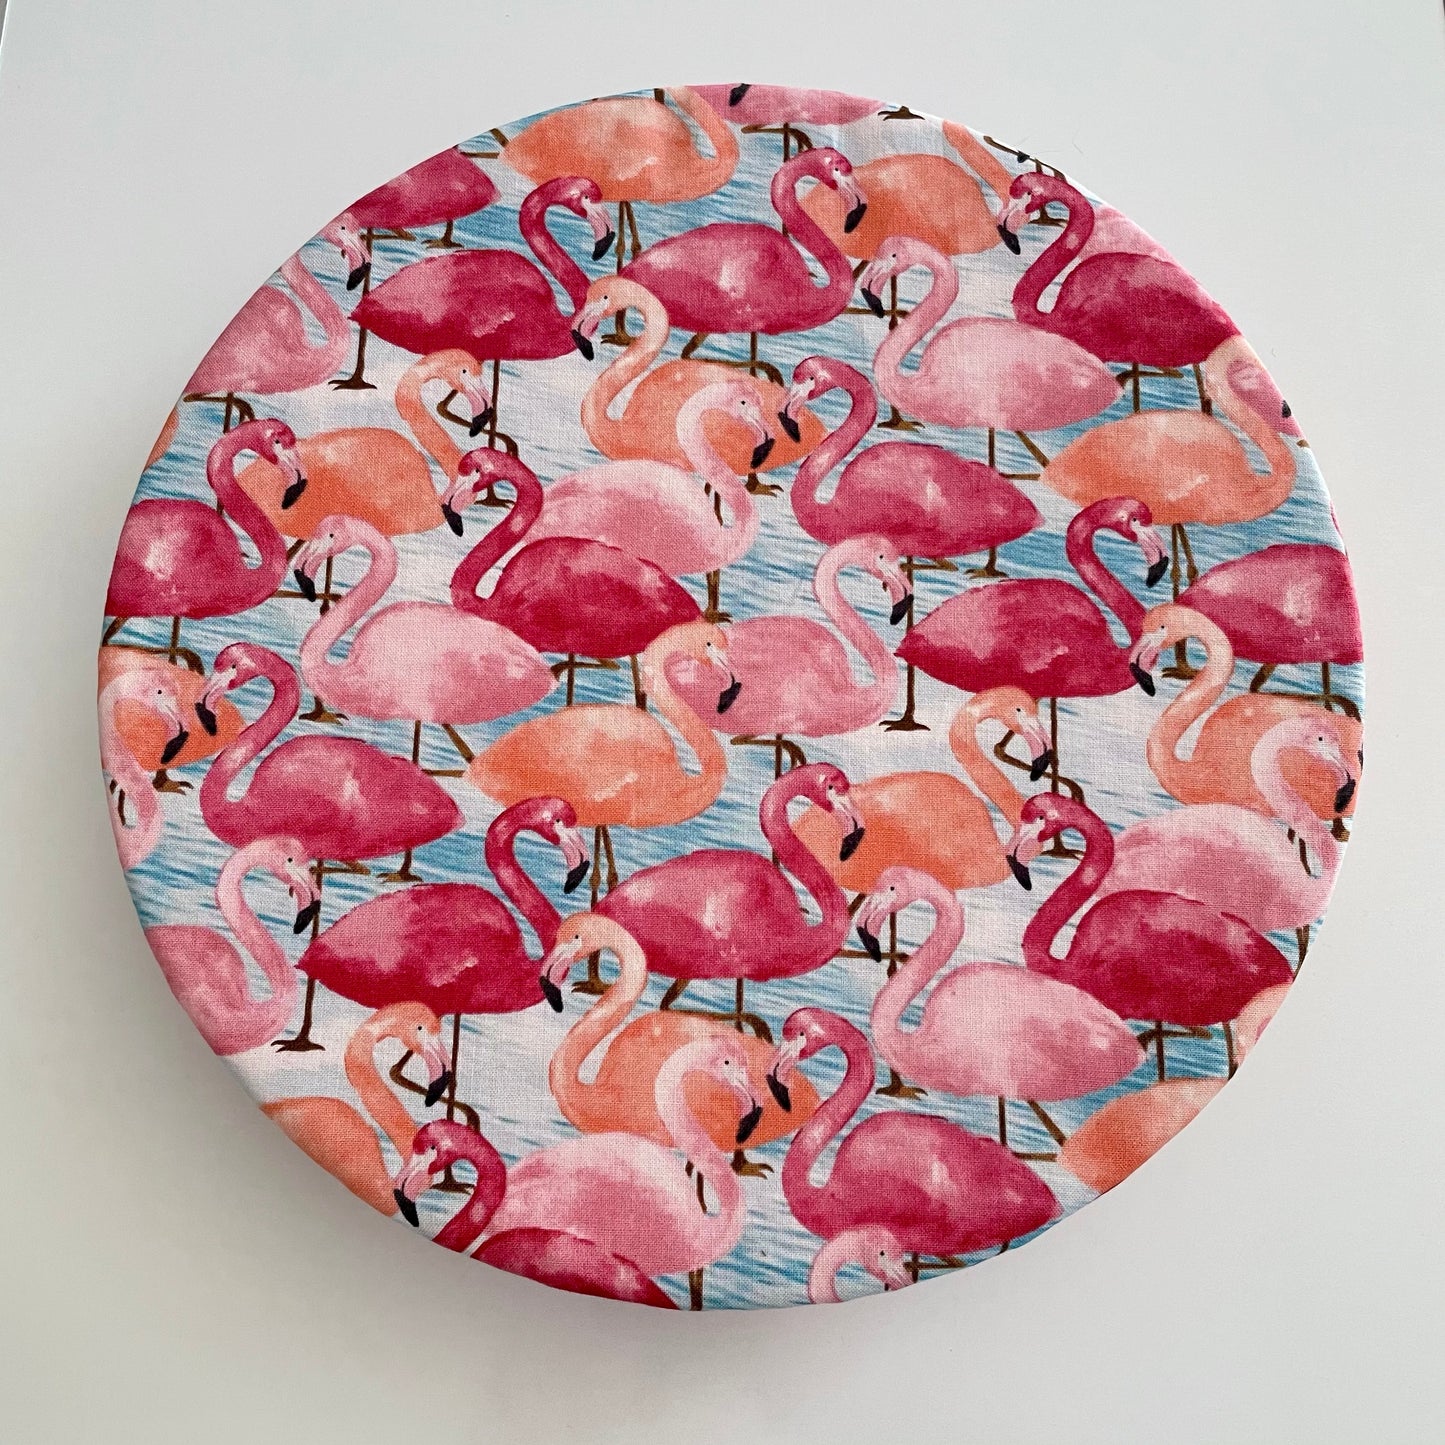 Stand Mixer Bowl Covers - Flamingo Party